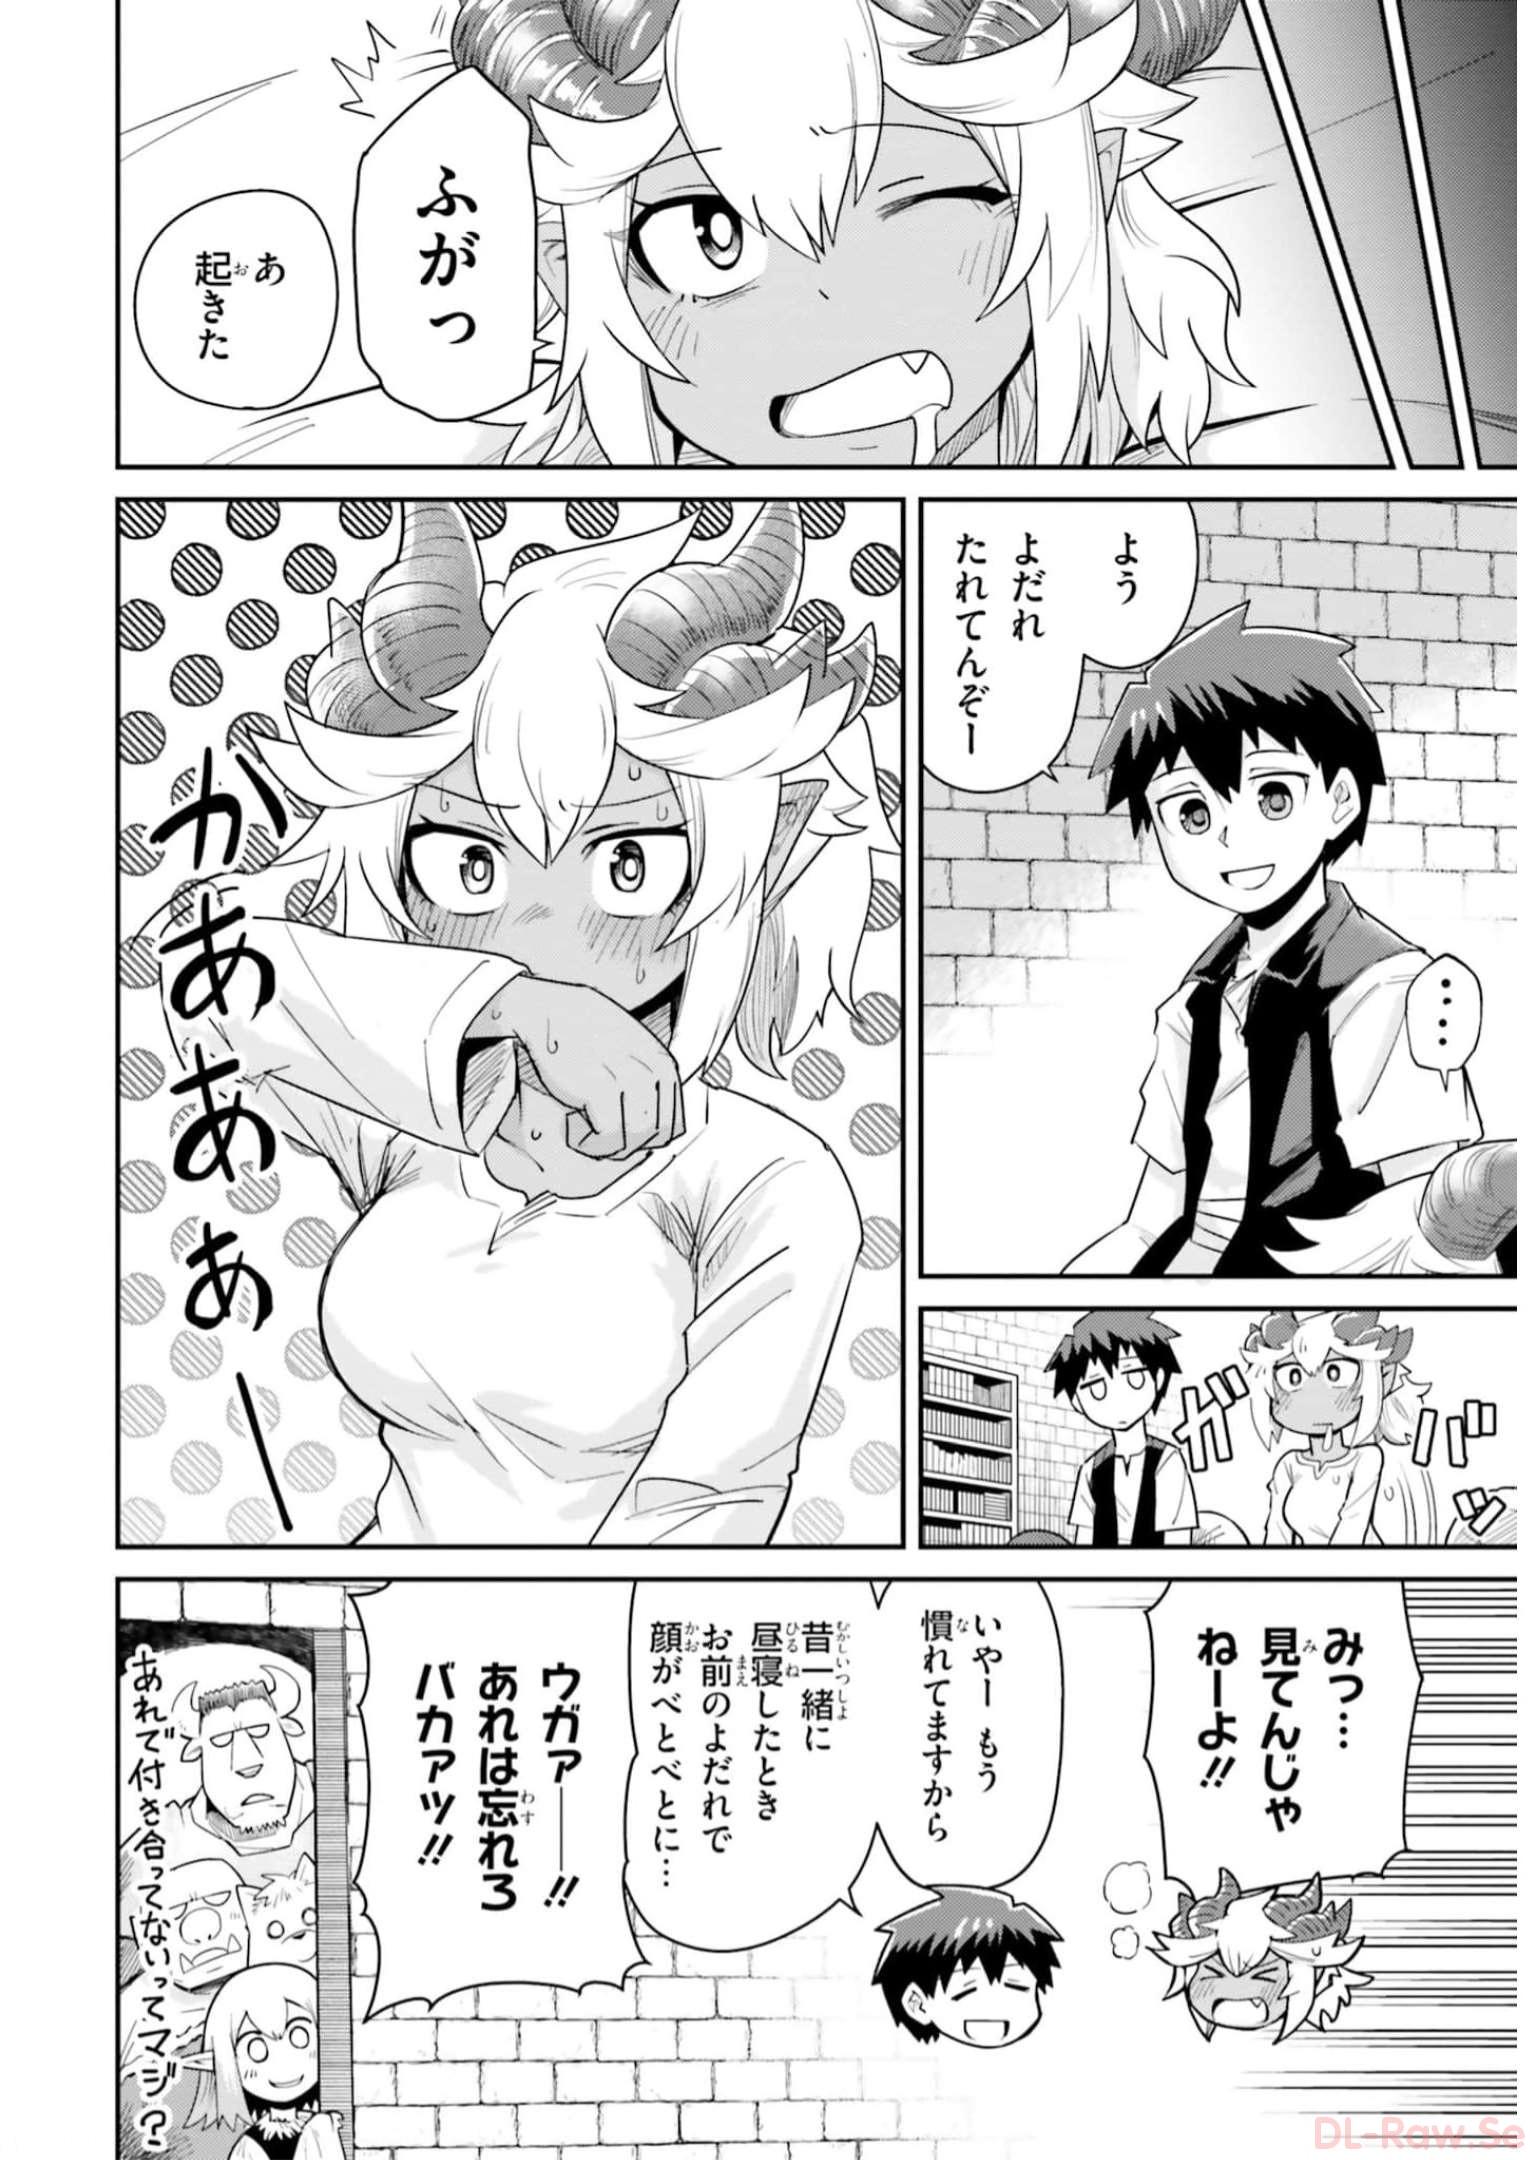 Dungeon Friends Forever Dungeon’s Childhood Friend ダンジョンの幼なじみ 第18.1話 - Page 4